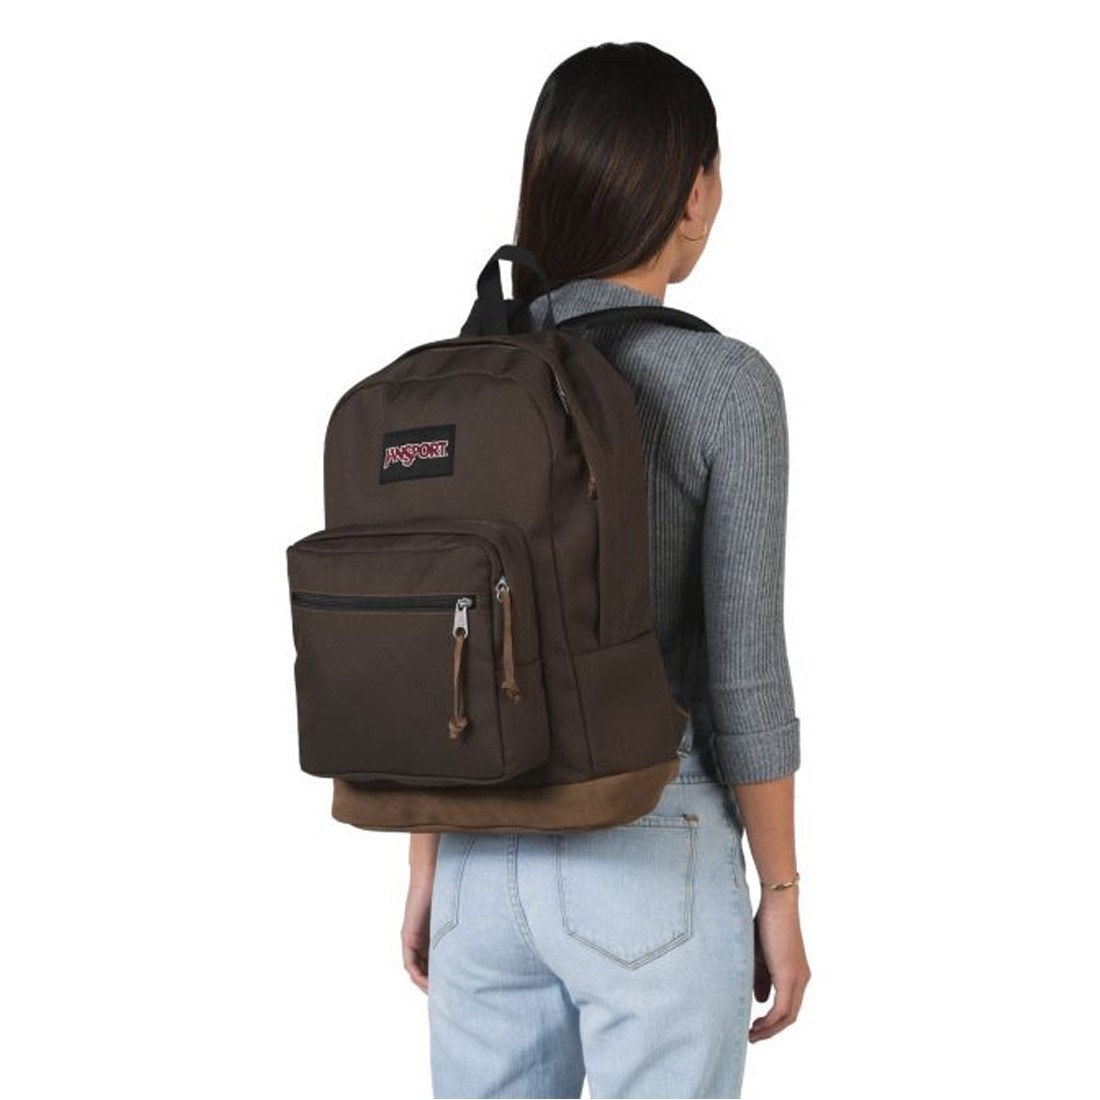 JS00TYP754K JanSport Right Pack Coffee Bean Backpack w/ 15" Laptop Sleeve 